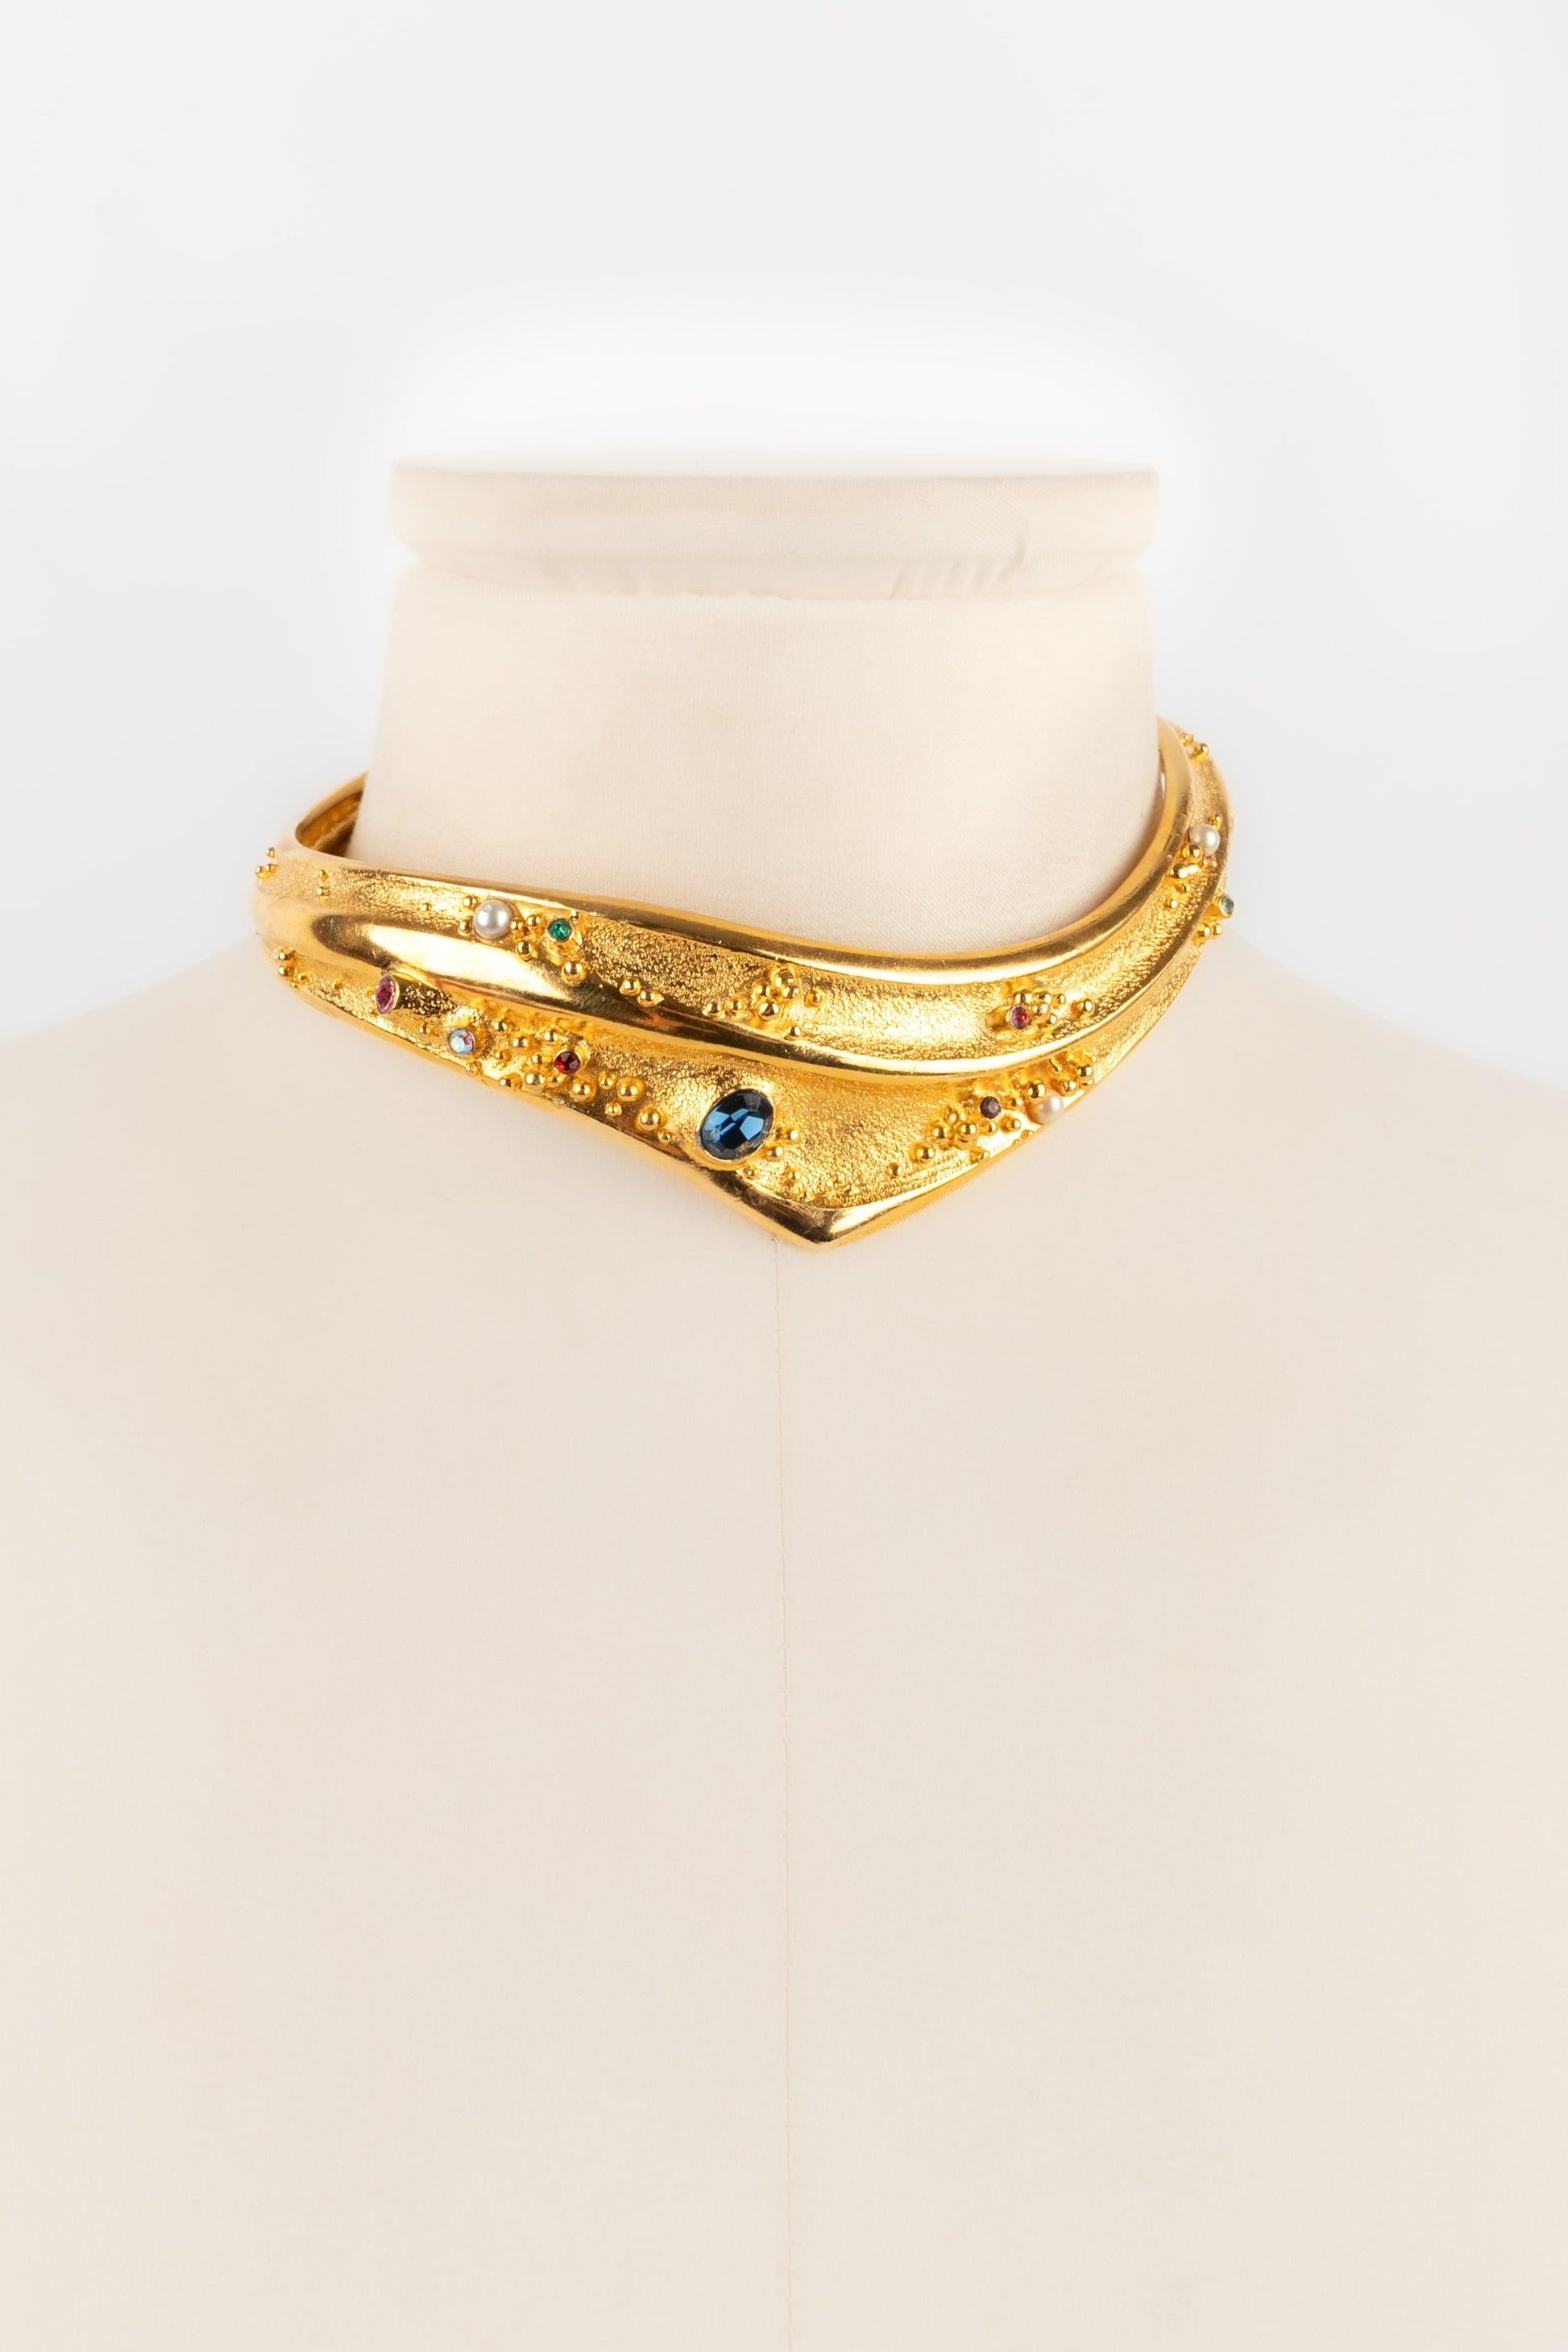 Christian Lacroix - (Made in France) Golden metal short necklace ornamented with rhinestones.

Additional information:
Condition: Very good condition
Dimensions: Length: 36 cm

Seller Reference: BC118